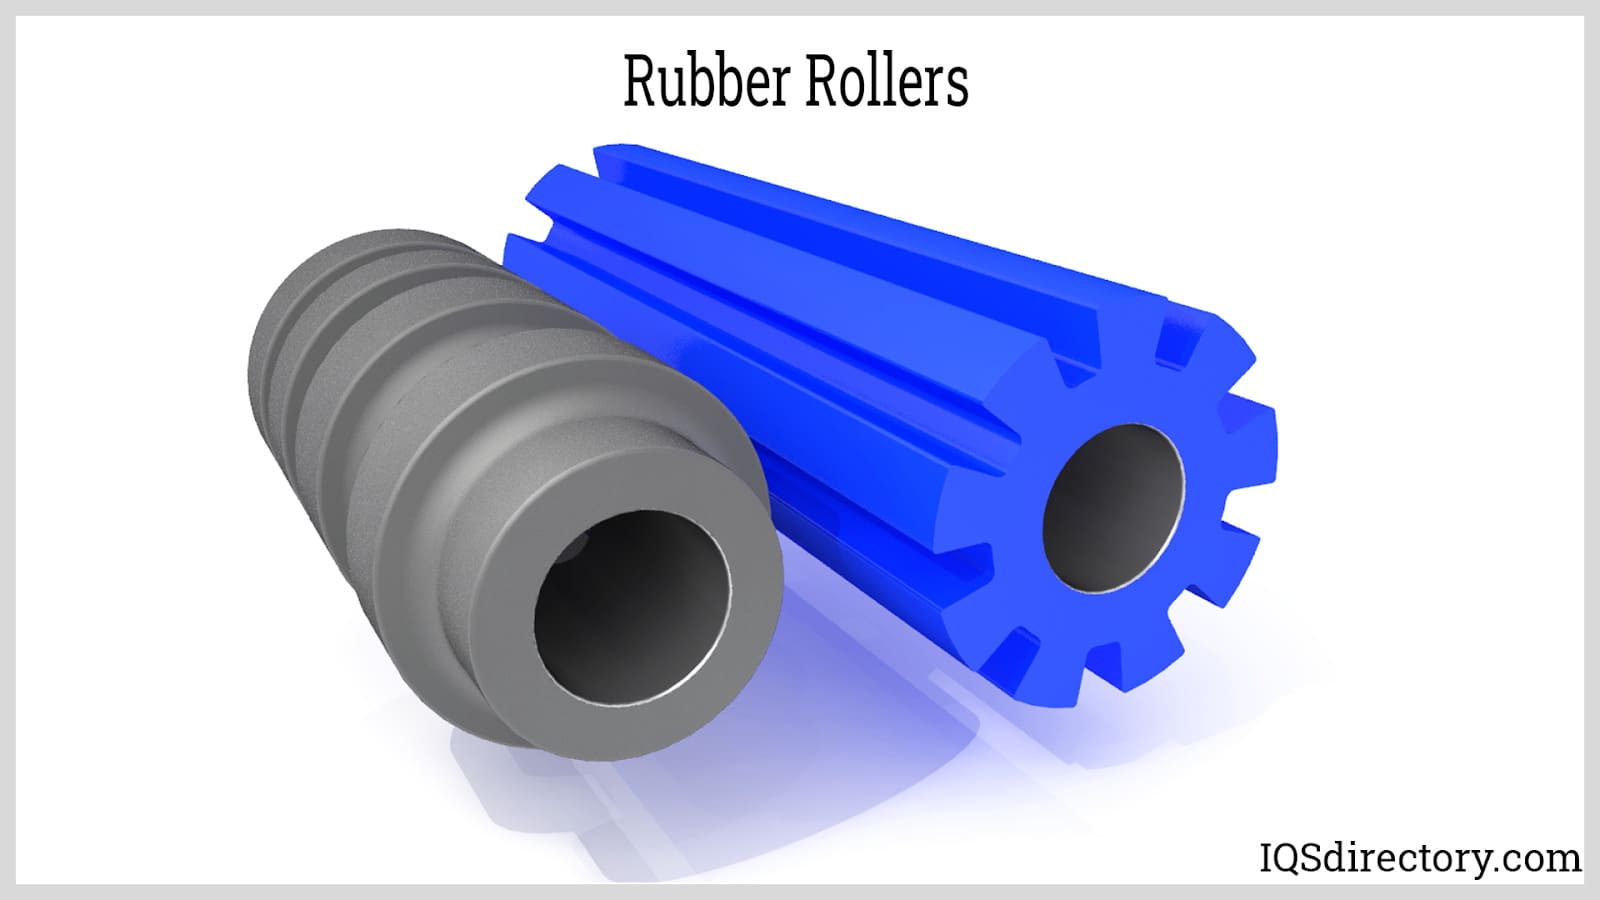 Silicone rubber compounds, Silicones Business, Business & Products